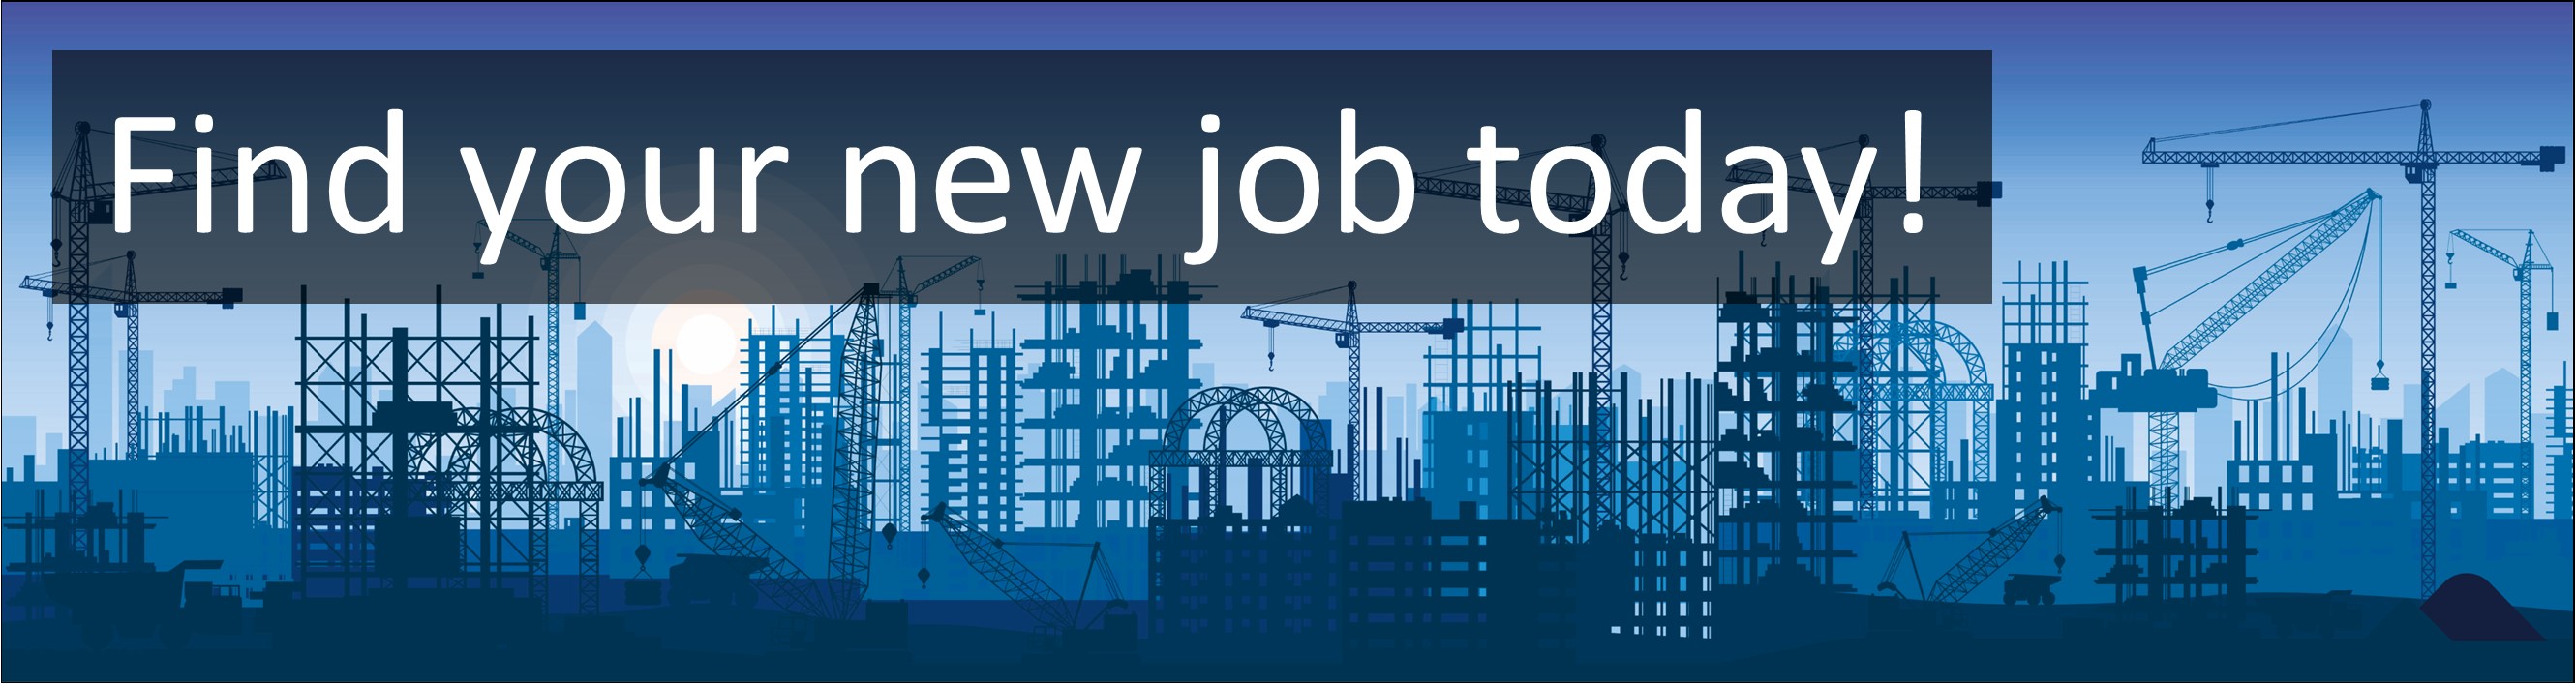 Construction & Trades Jobs. Plant Operative / 360 Excavator Operator / Digger / Dumper / Tractor Driver / Construction Jobs, Careers & Vacancies in Plymouth, Devon Advertised by AWD online – Multi-Job Board Advertising and CV Sourcing Recruitment Services